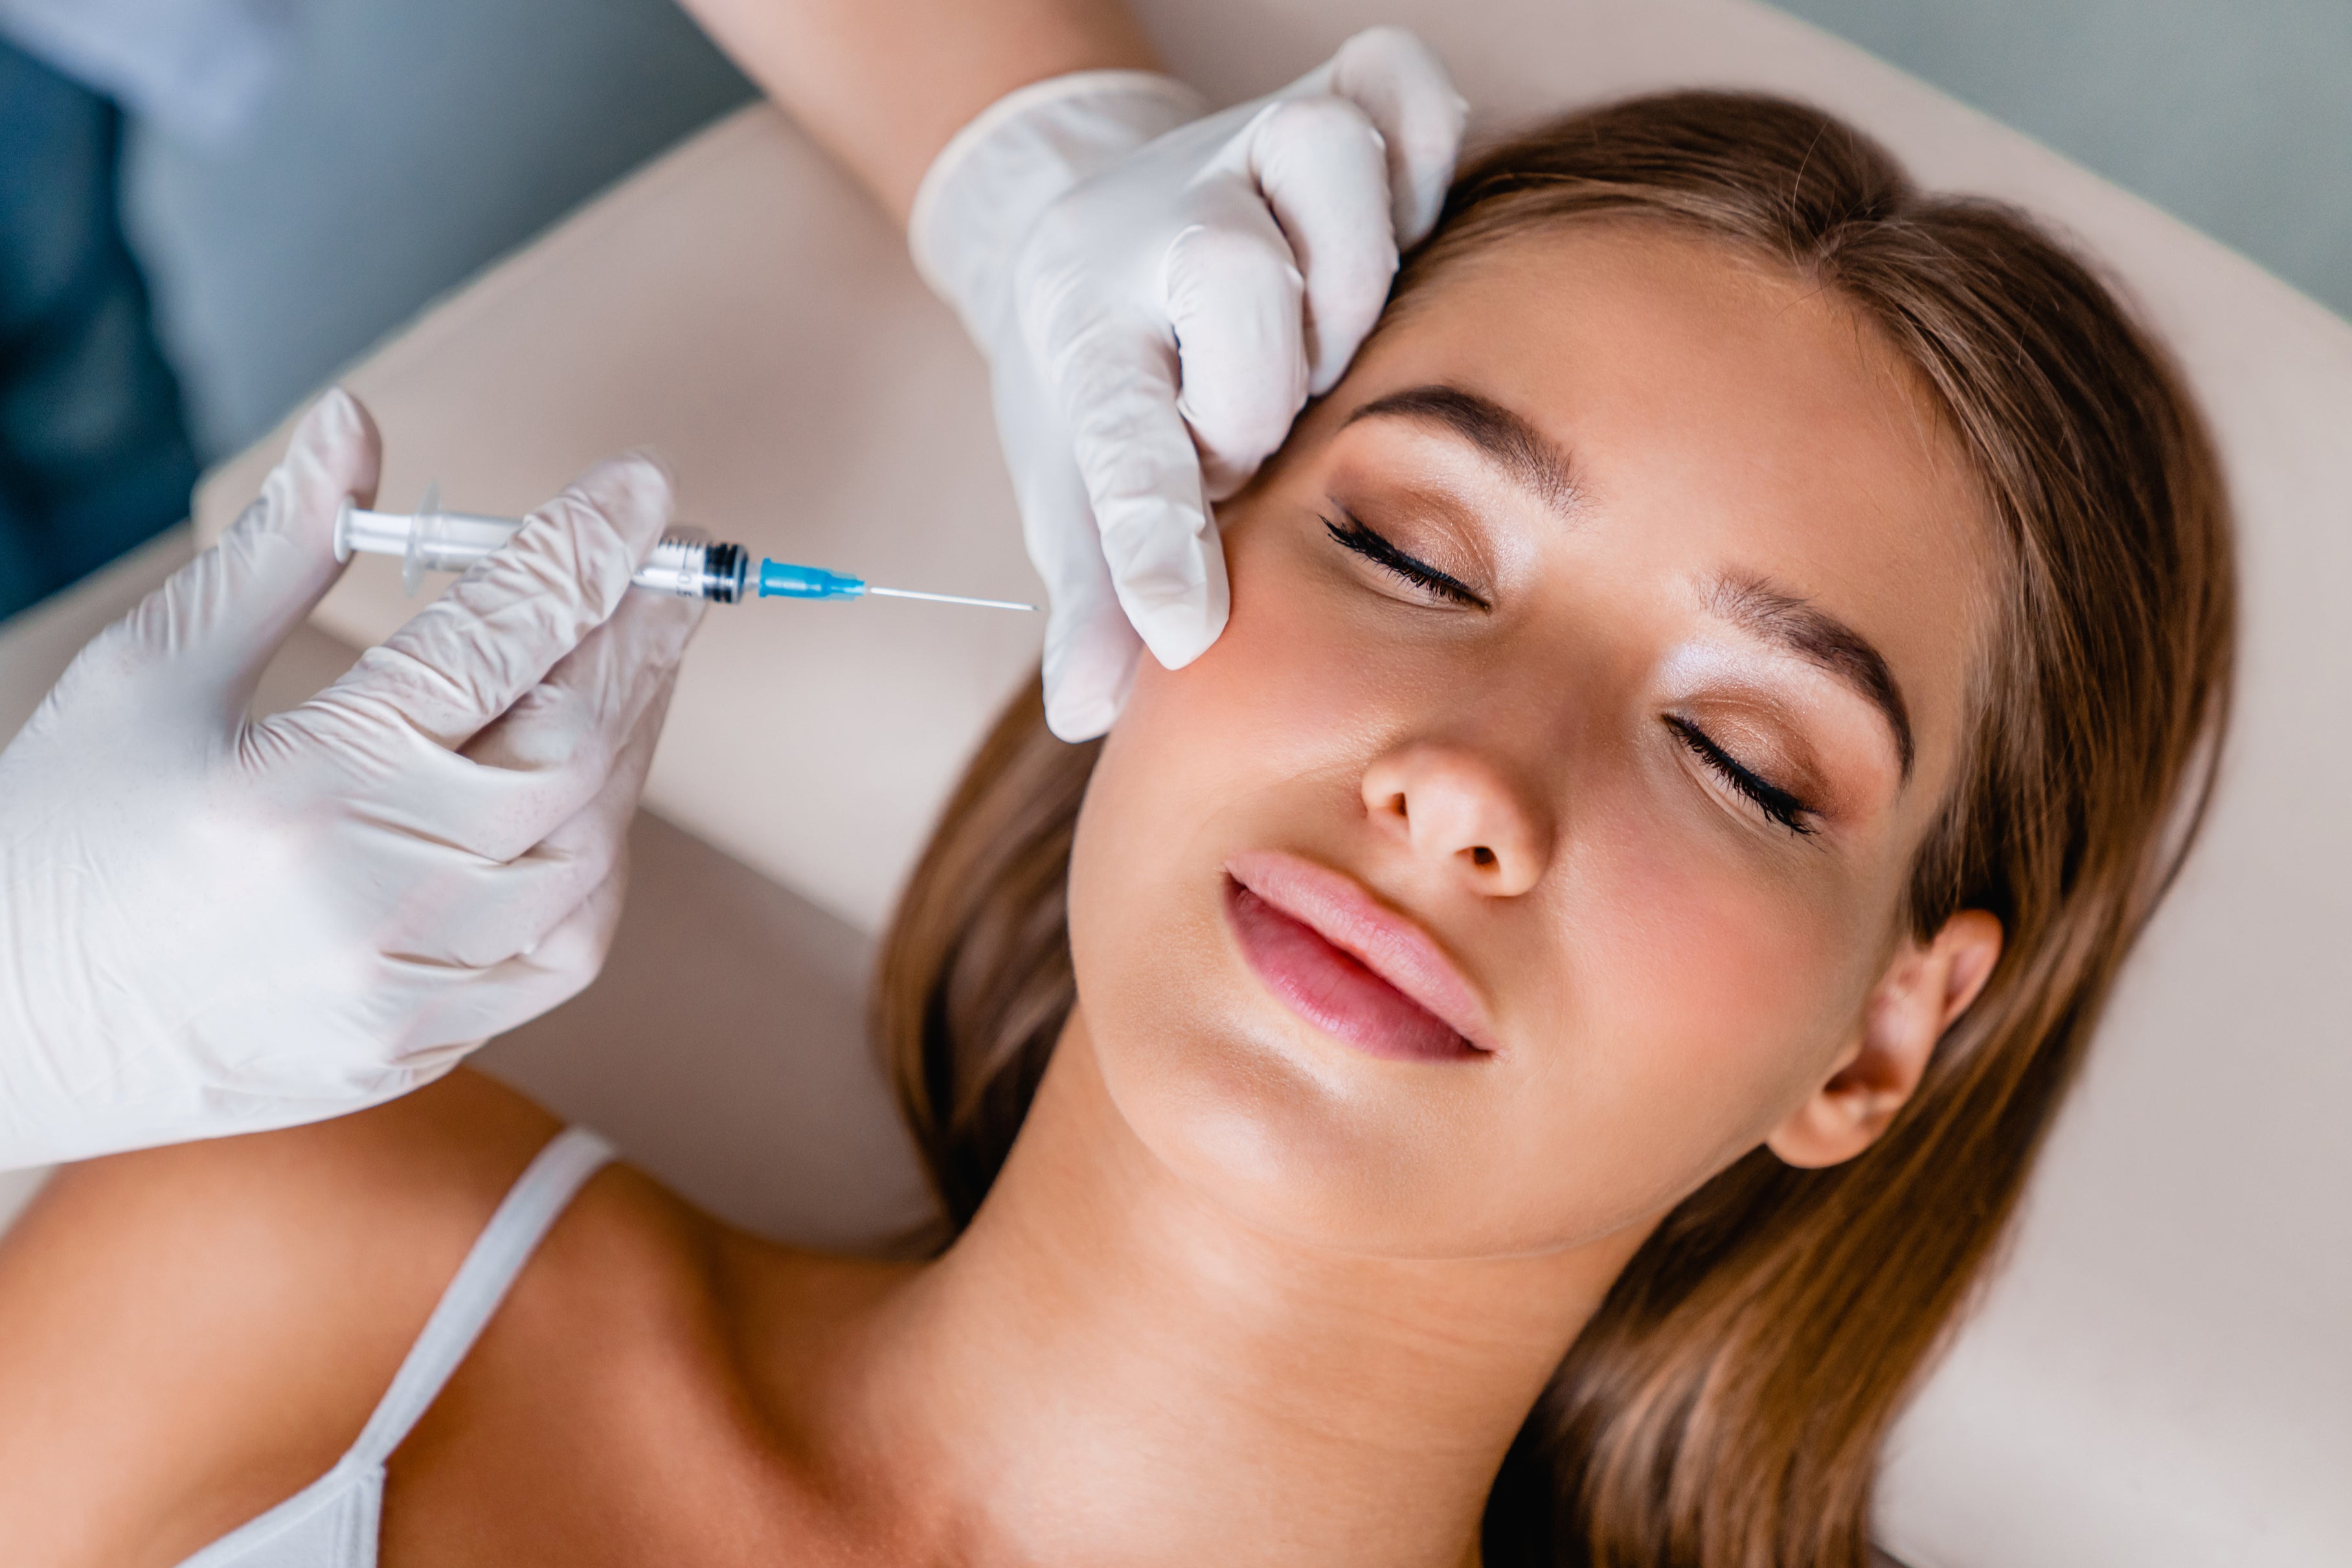 How thousands of under-18s fell for Botox and filler